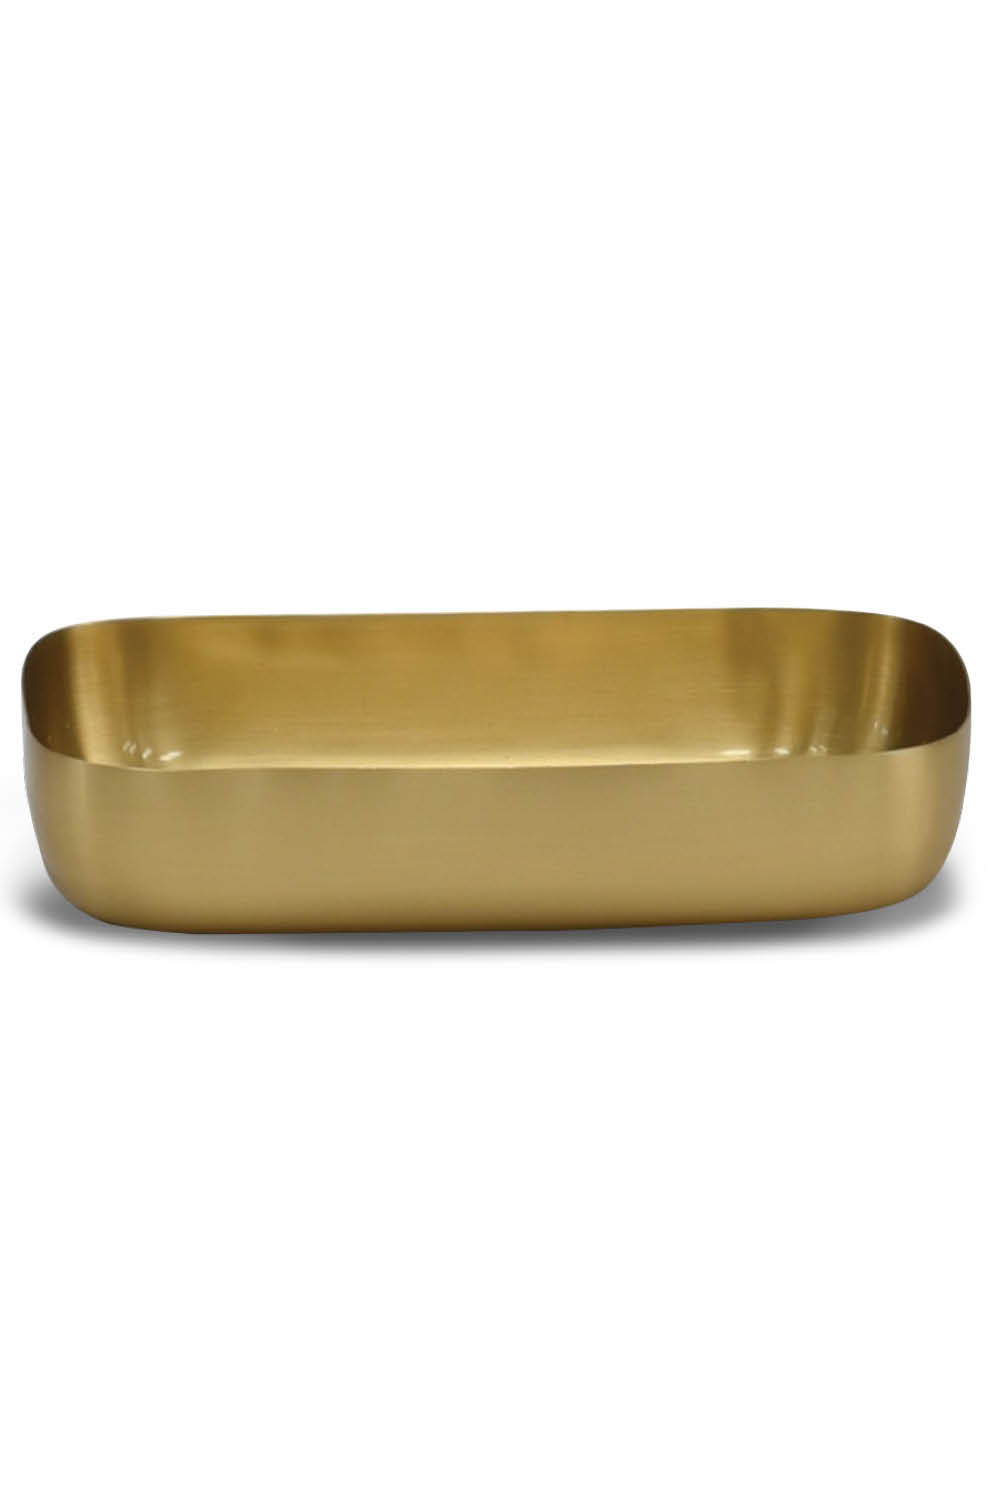 Brushed Brass Paper Towel Tray